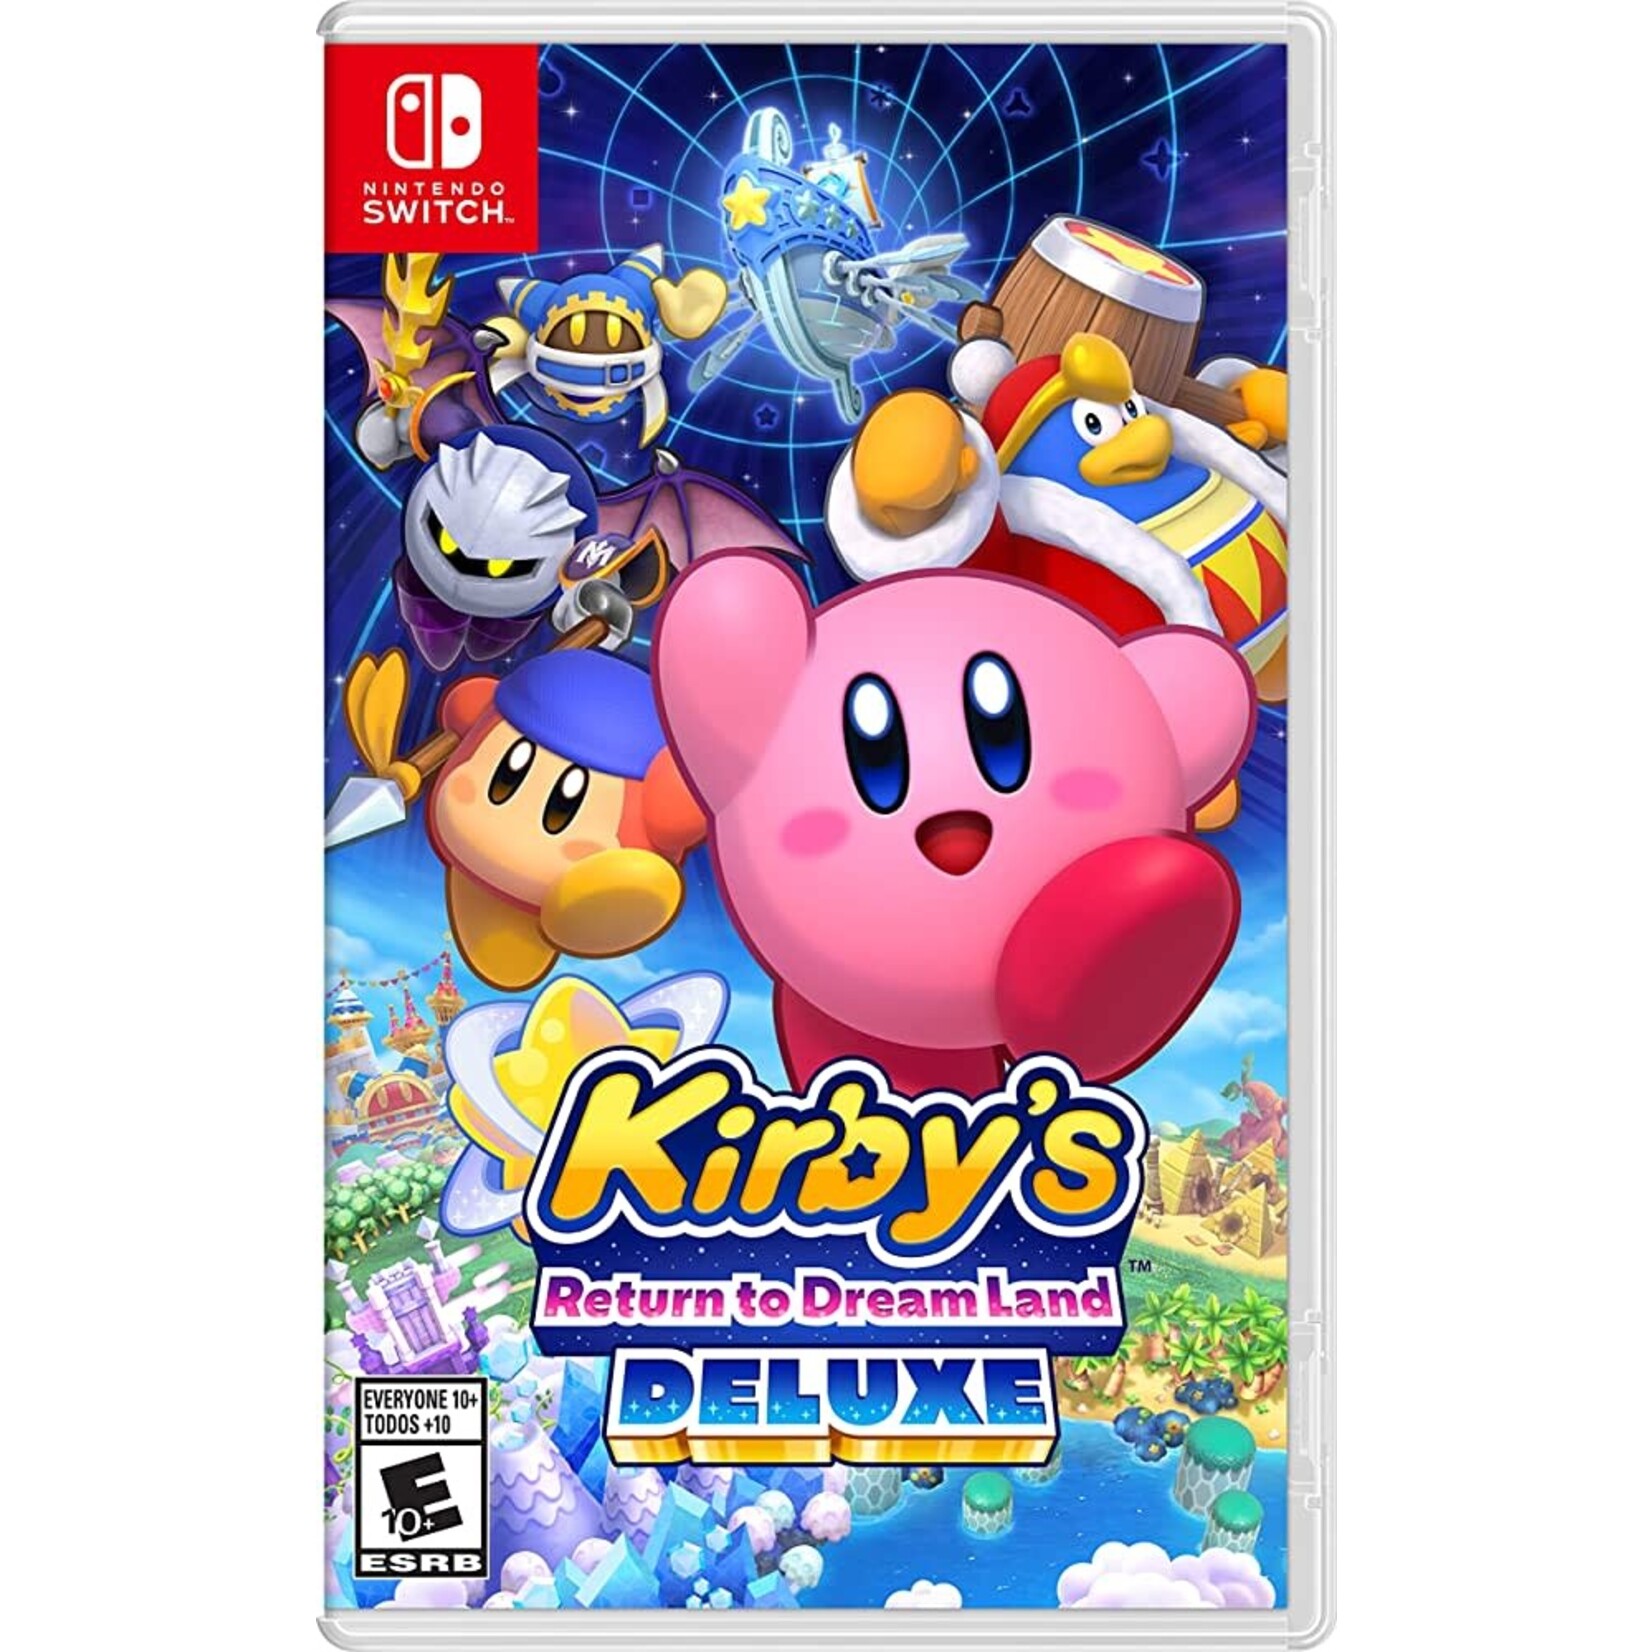 SWITCHU-Kirby's Return to Dream Land Deluxe